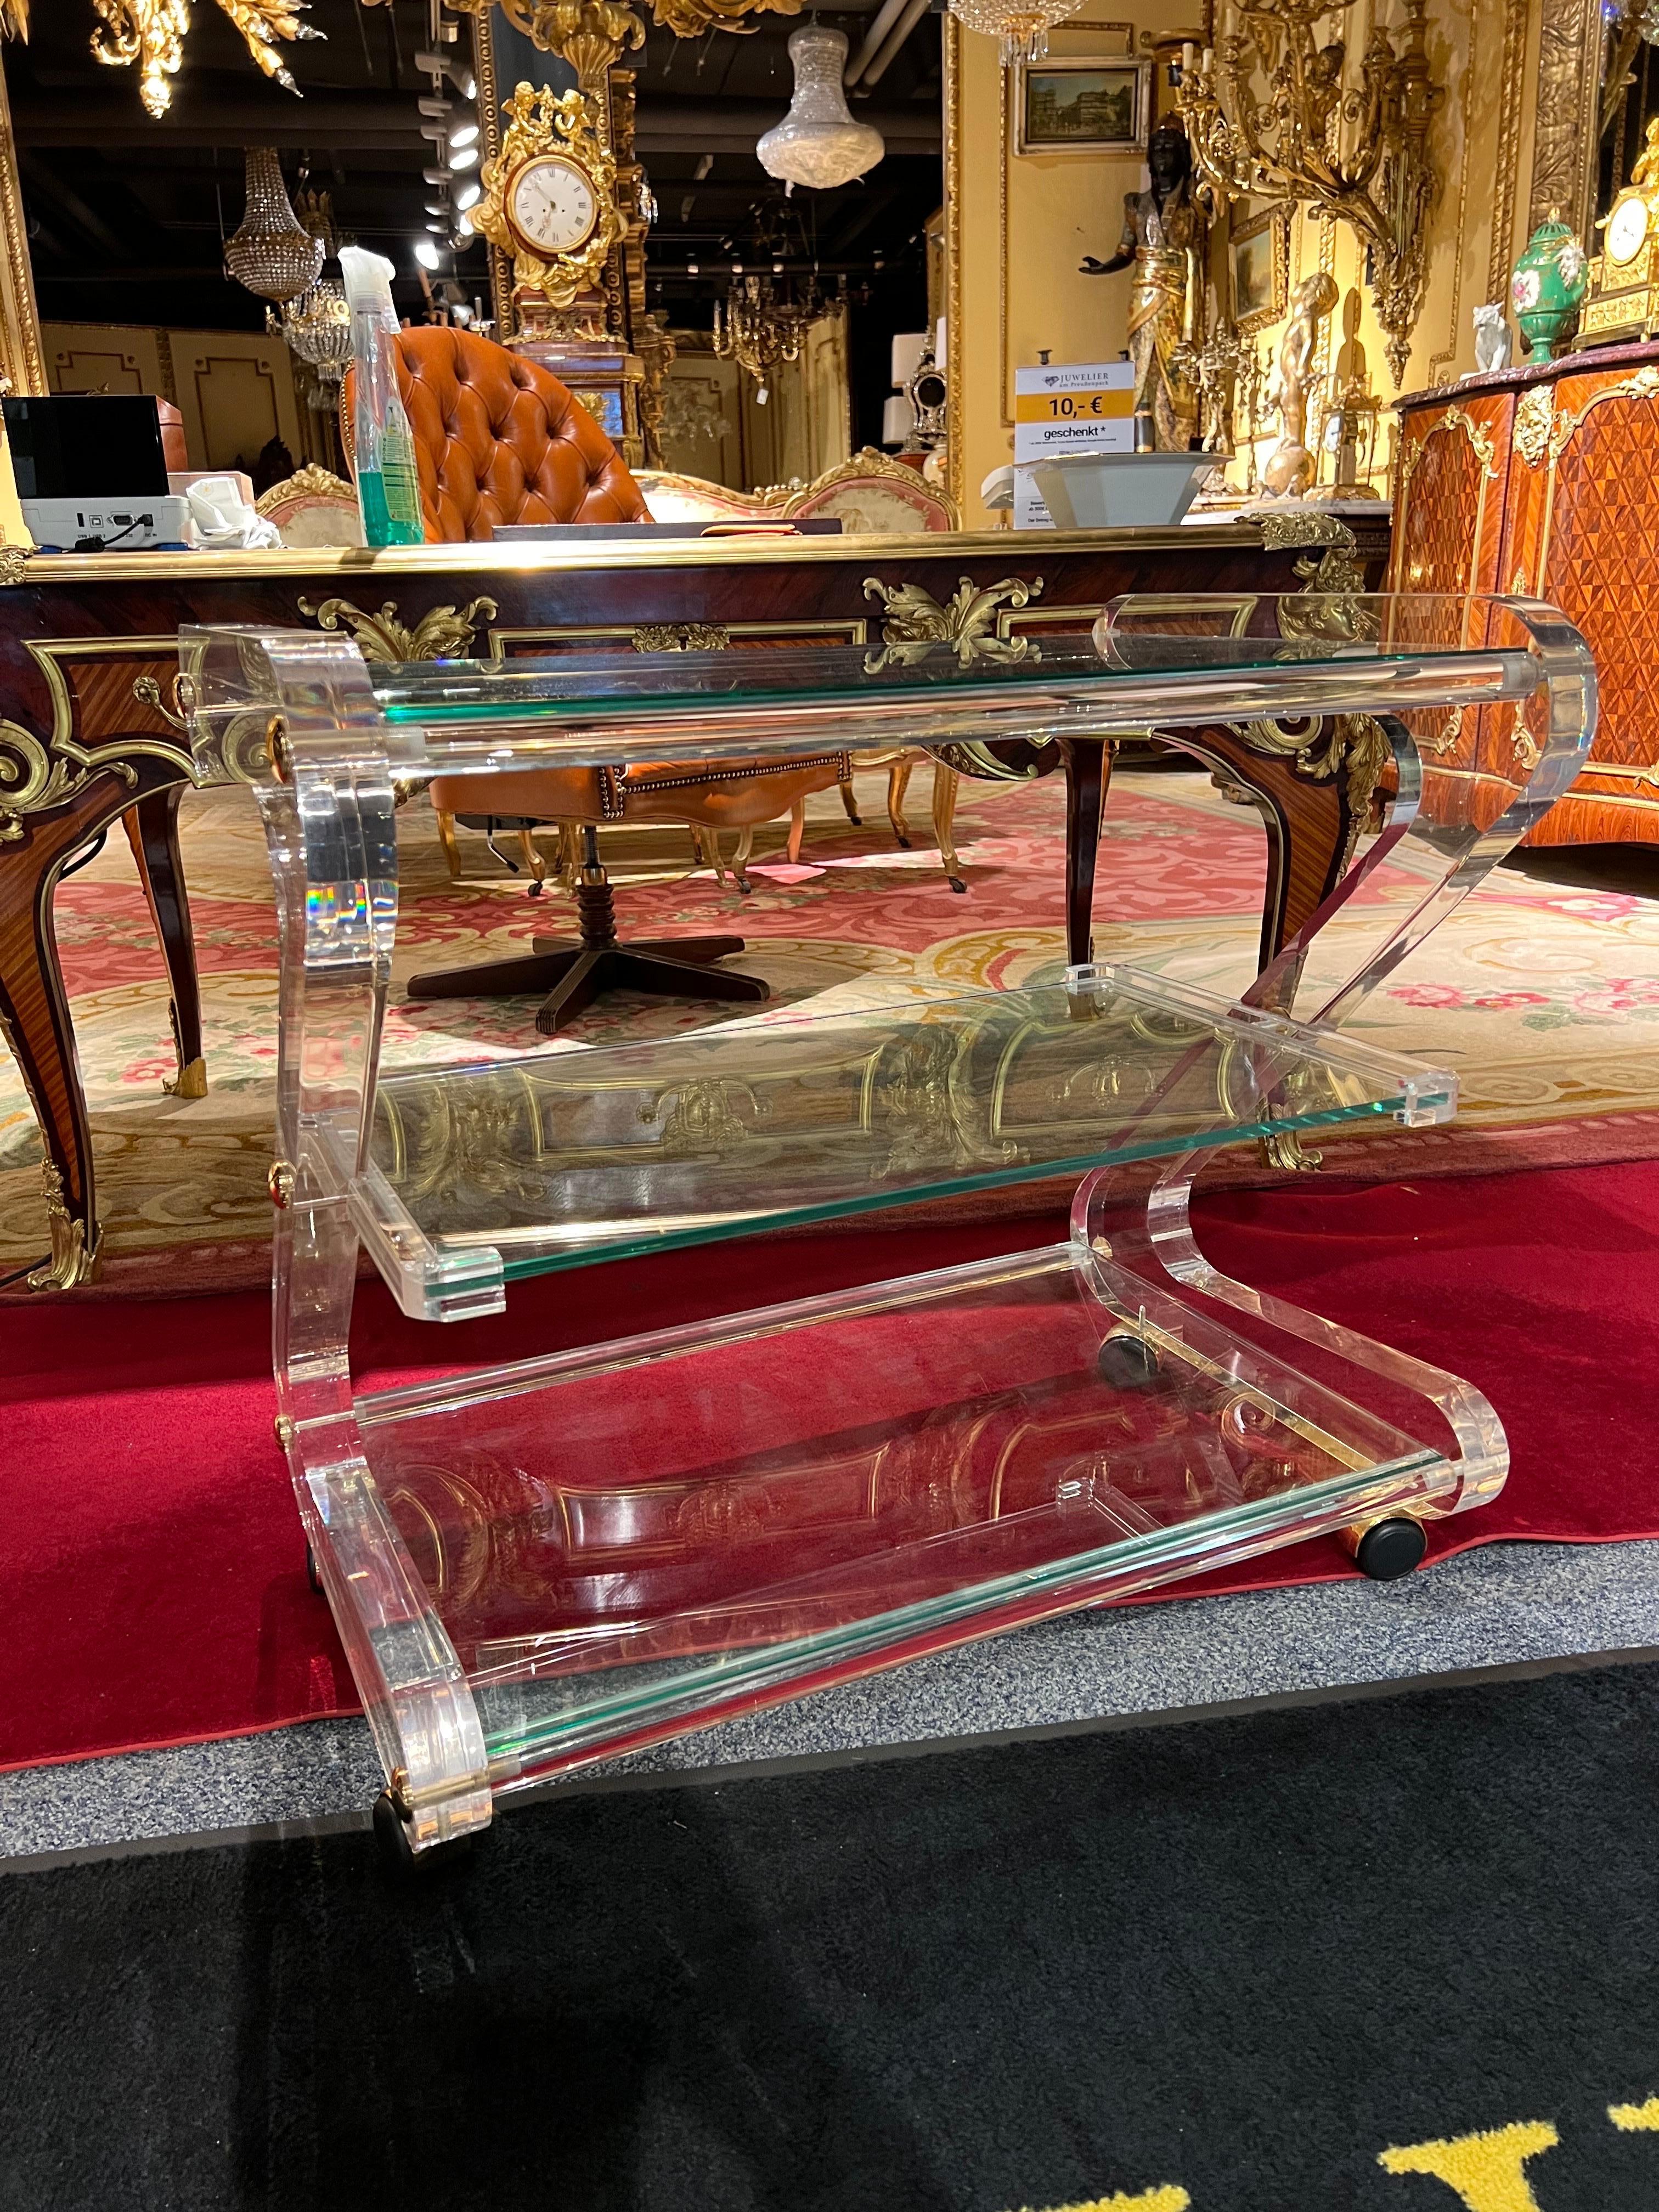 Acrylic serving tray table with massive frame and 3 glass plates

Made in italy

Light surface scratches.